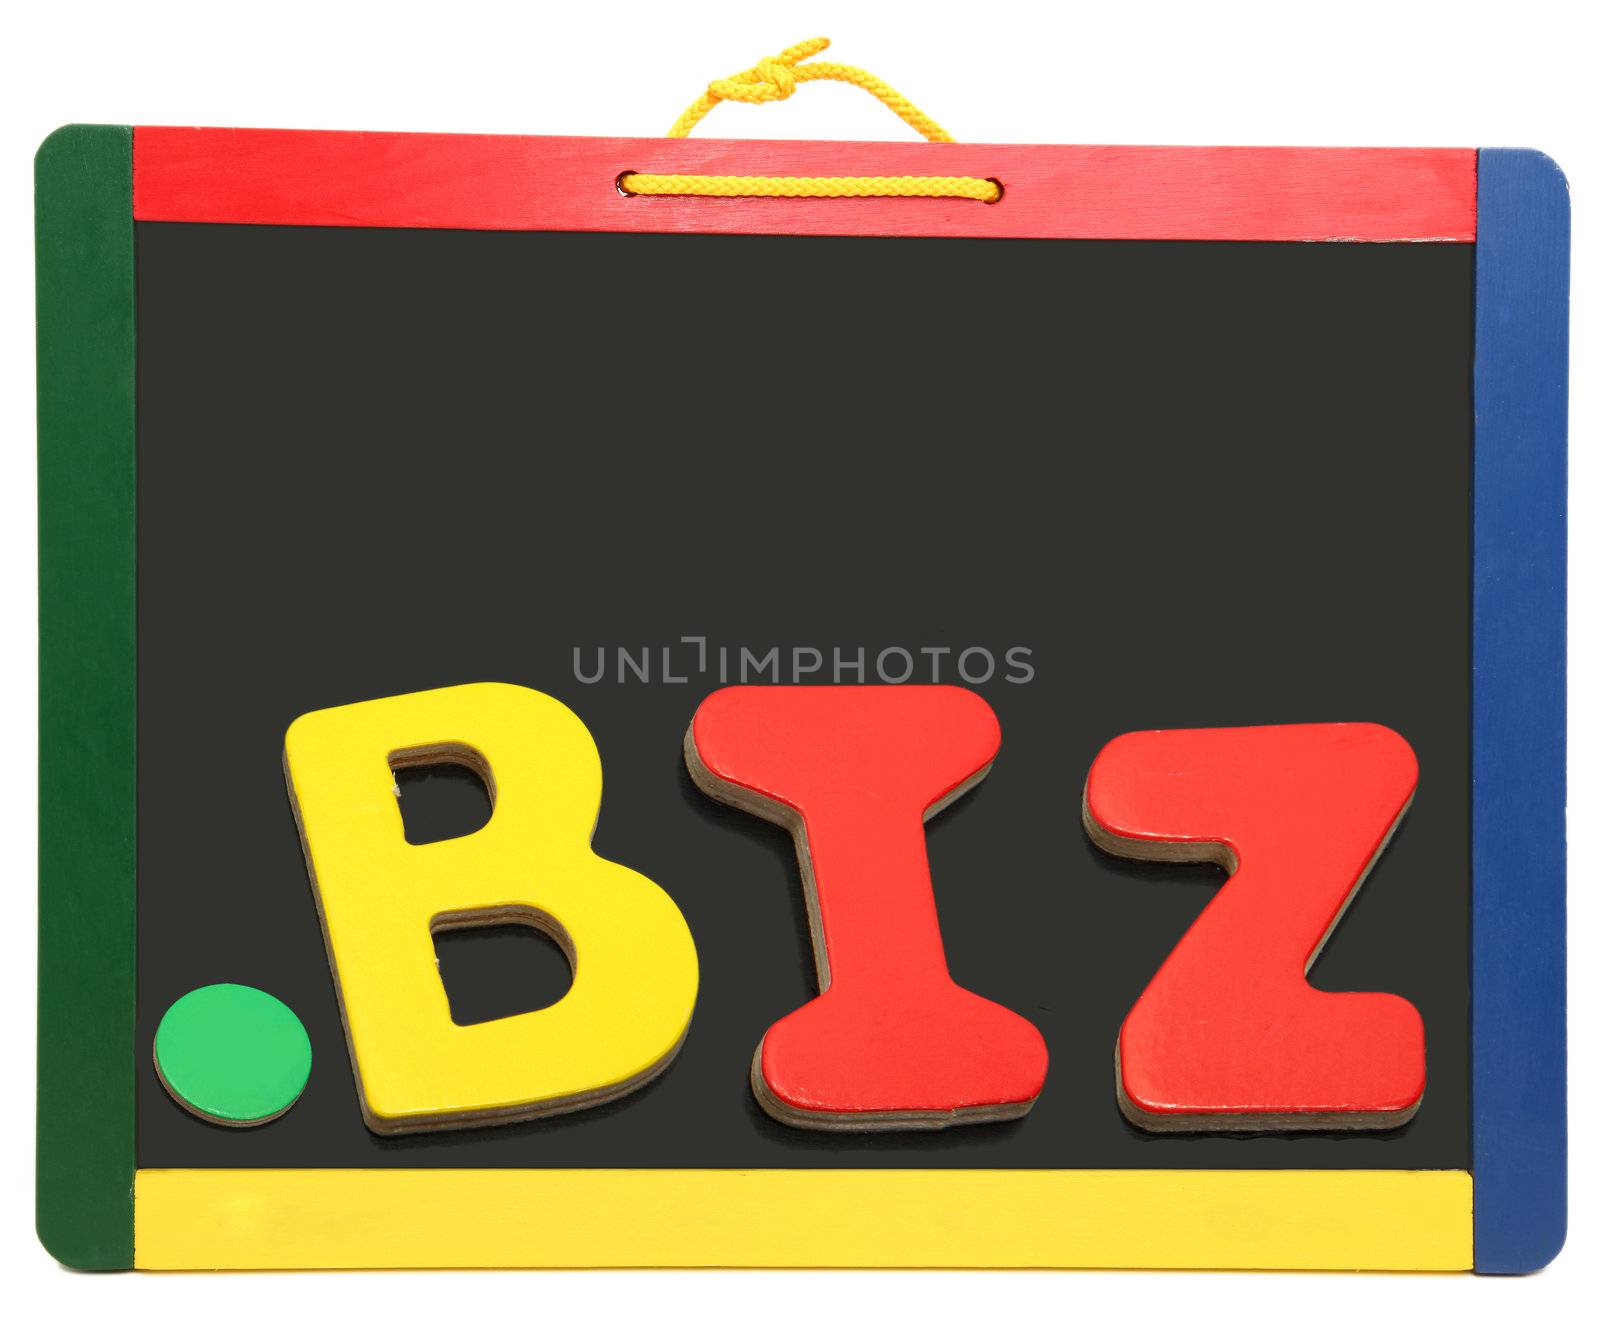 Top level domain Dot BIZ spelled out on chalkboard with wooden letters